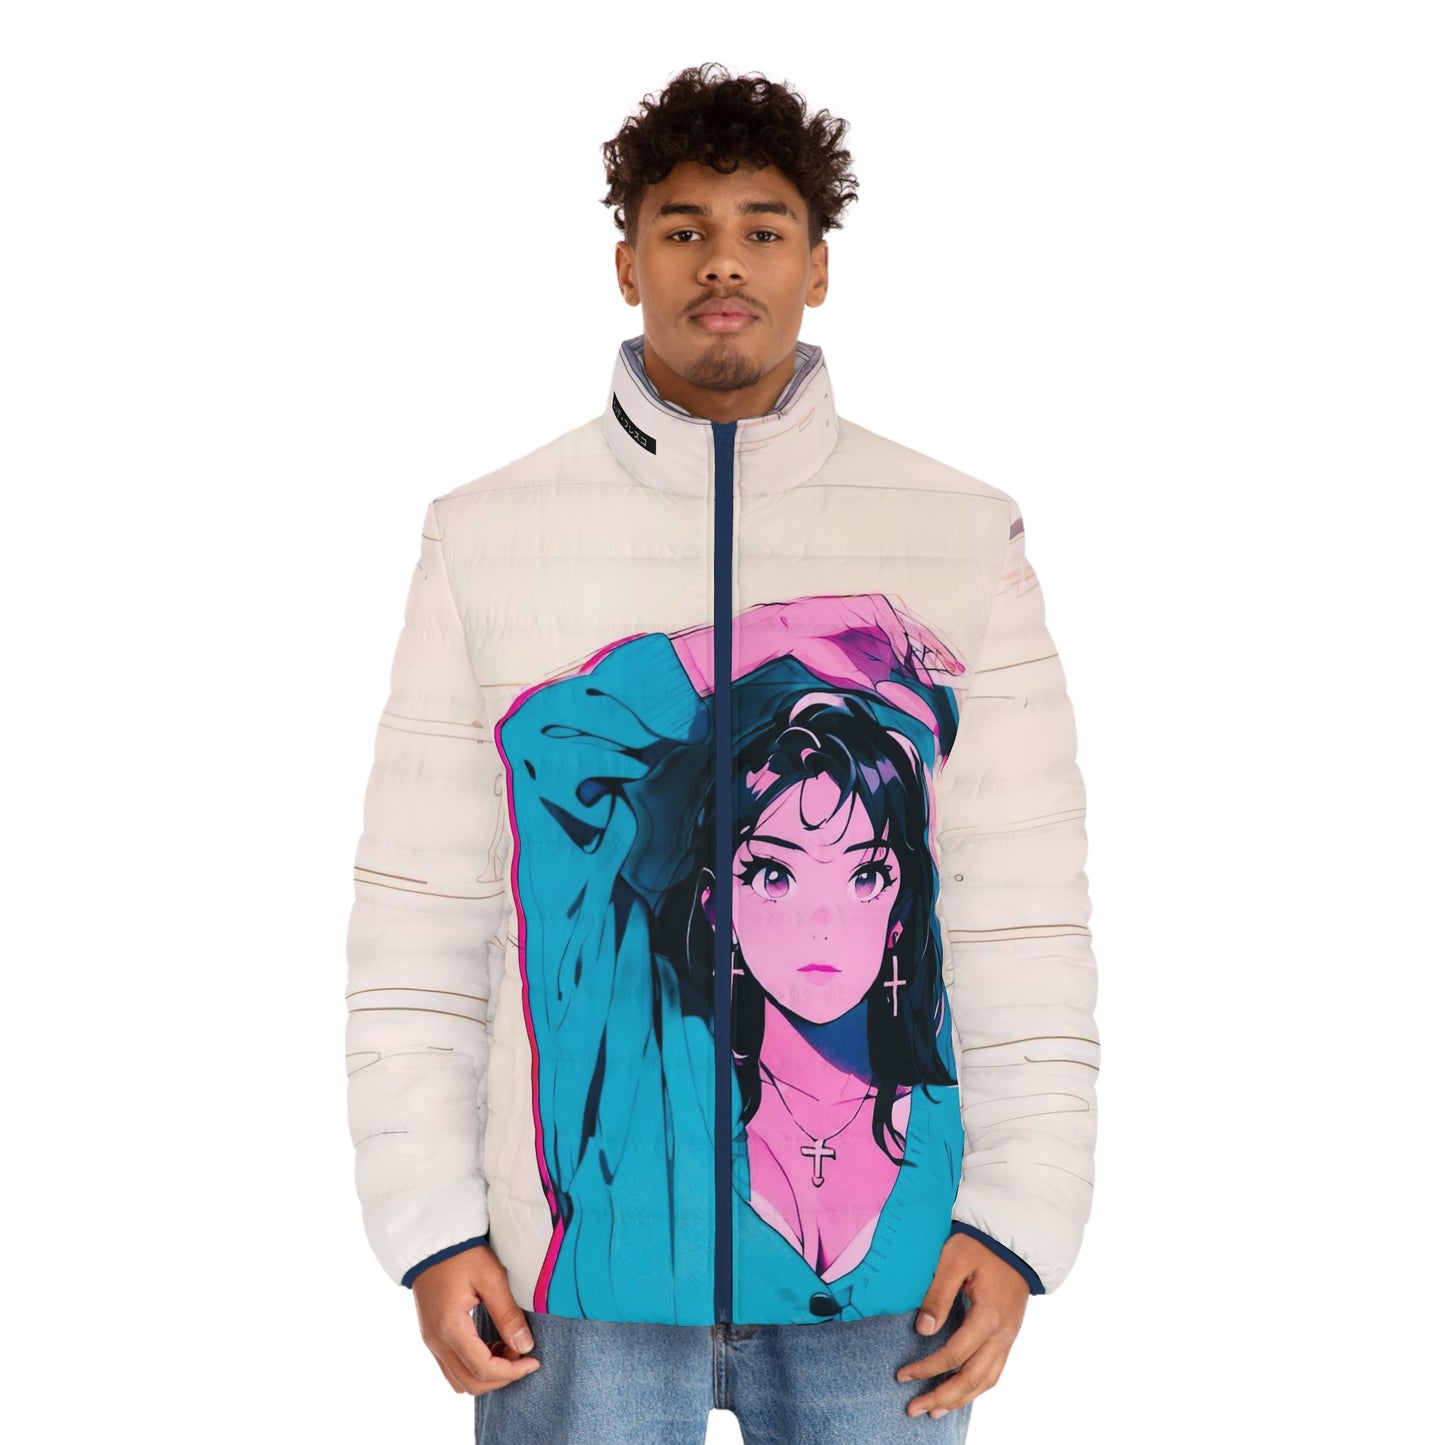 Anime Style Art Men's Puffer Jacket (AOP)- "In the 90s"